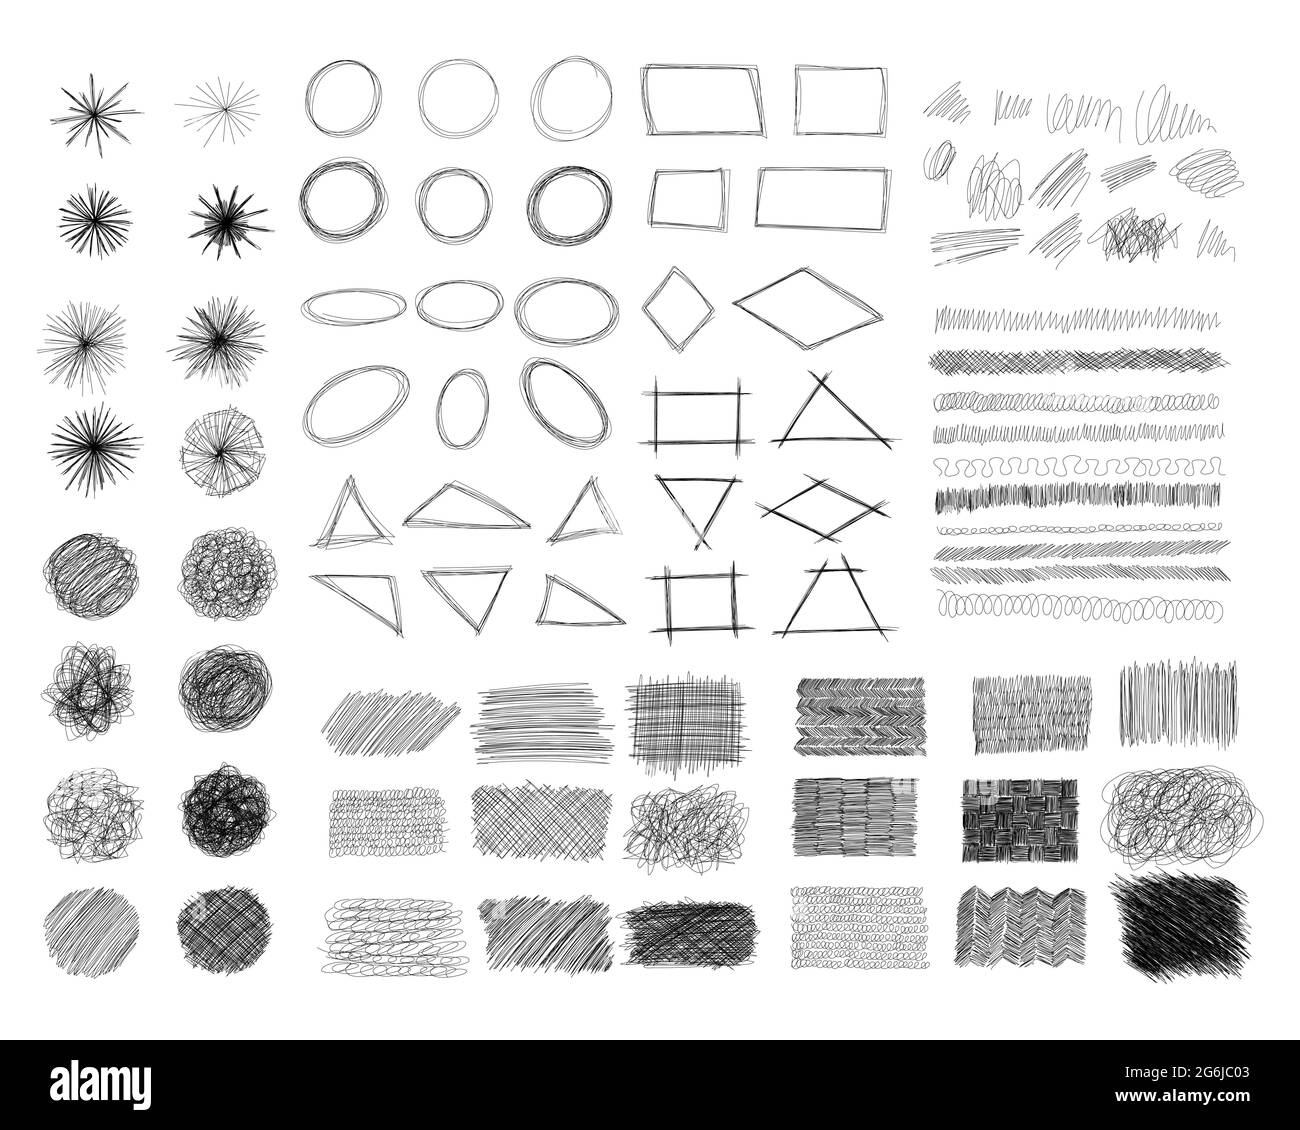 Ink pen scrawl collection - various shapes of hand drawn scribble line drawings. Stock Vector